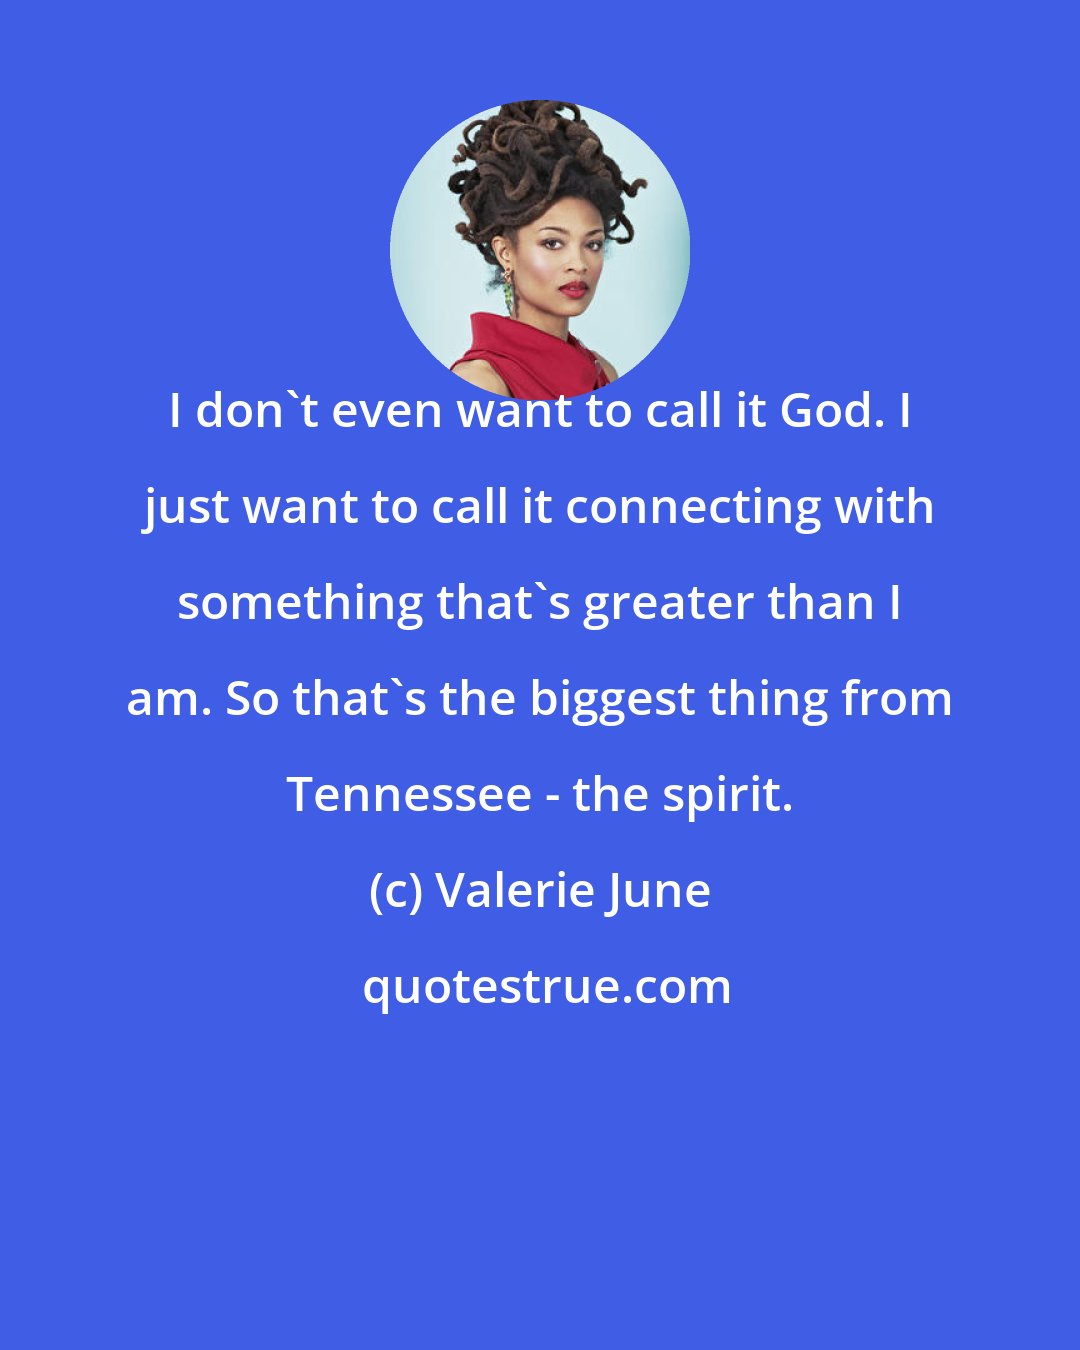 Valerie June: I don't even want to call it God. I just want to call it connecting with something that's greater than I am. So that's the biggest thing from Tennessee - the spirit.